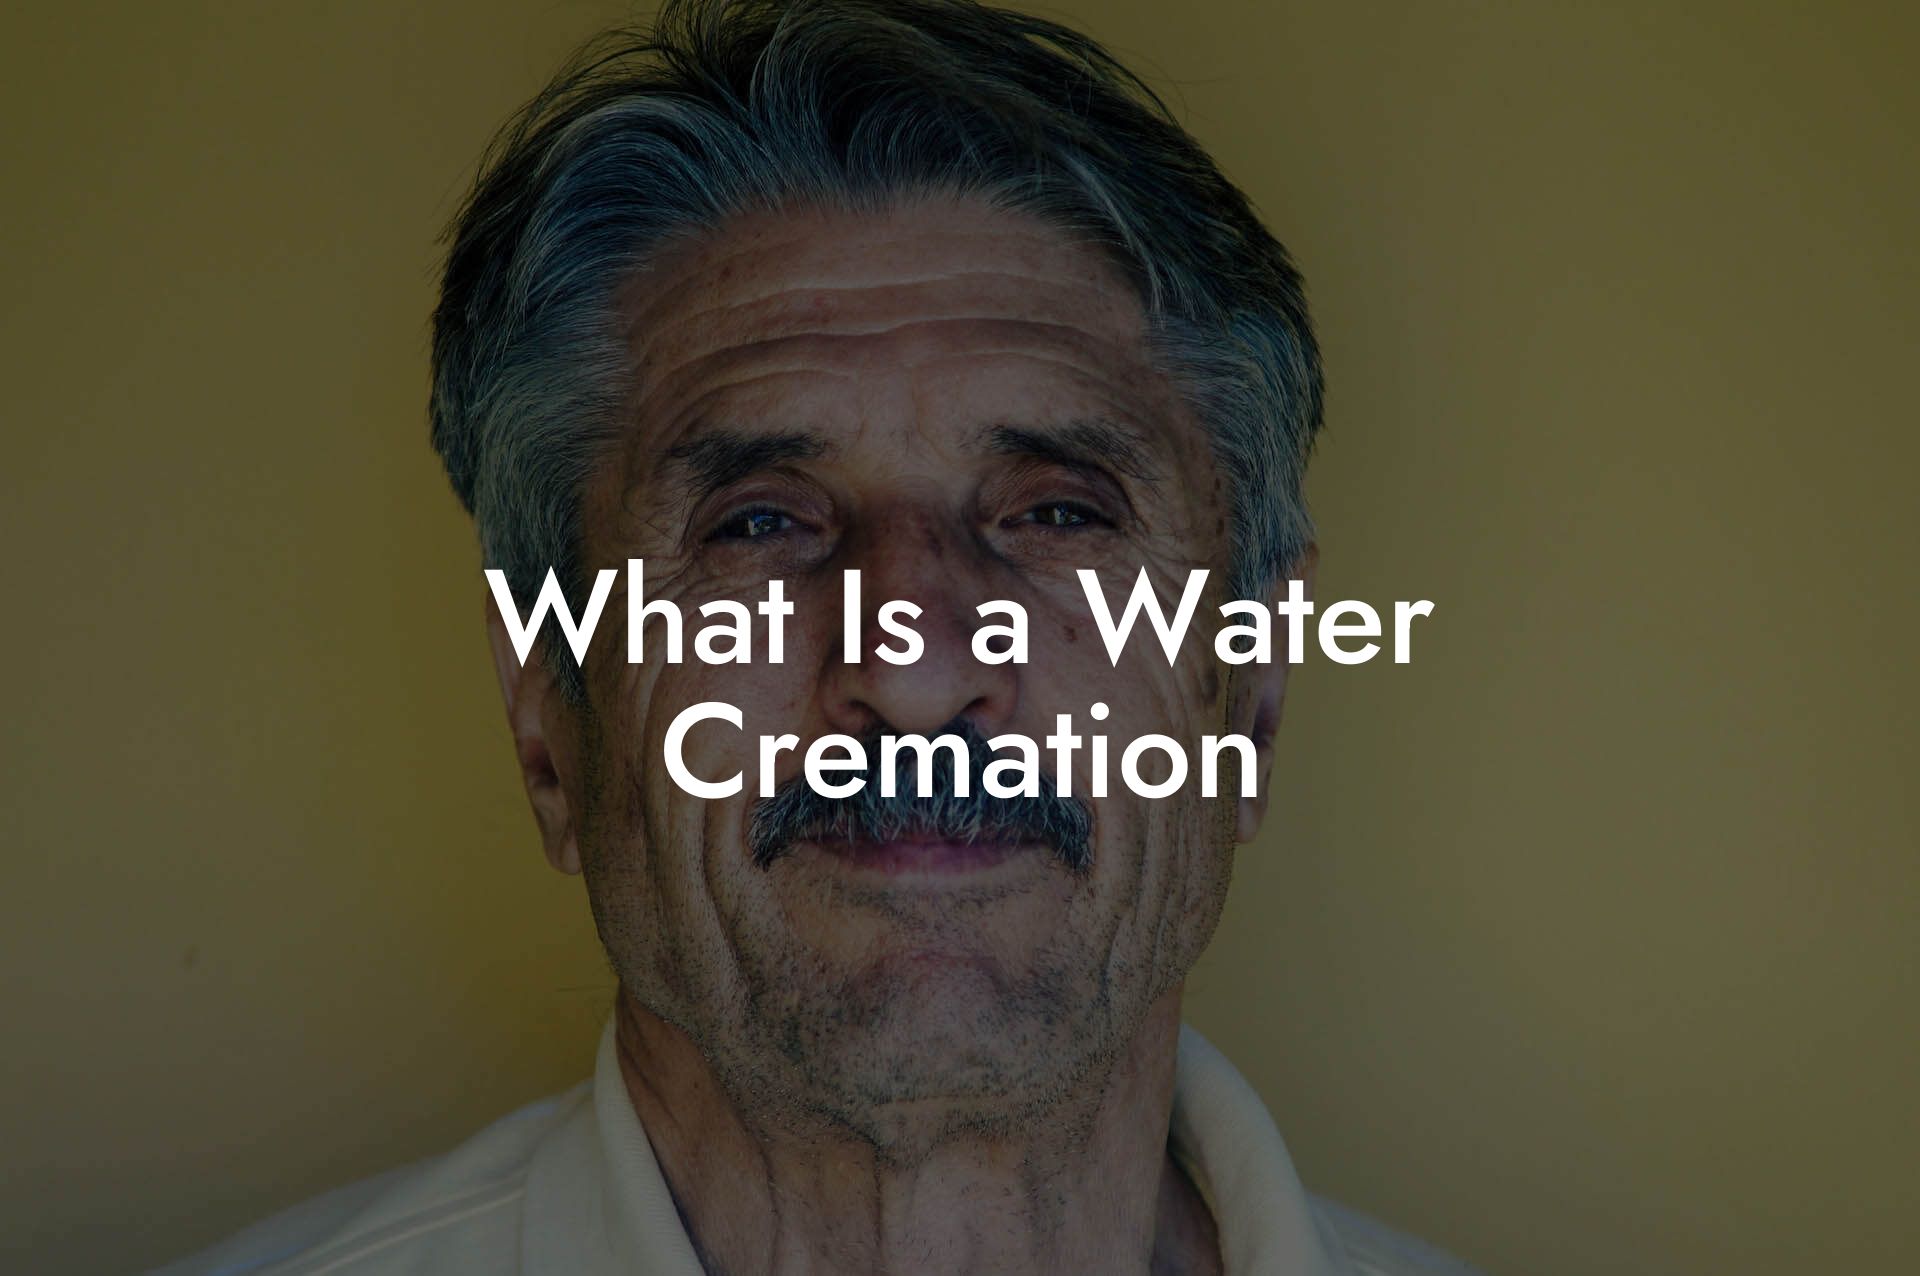 What Is a Water Cremation